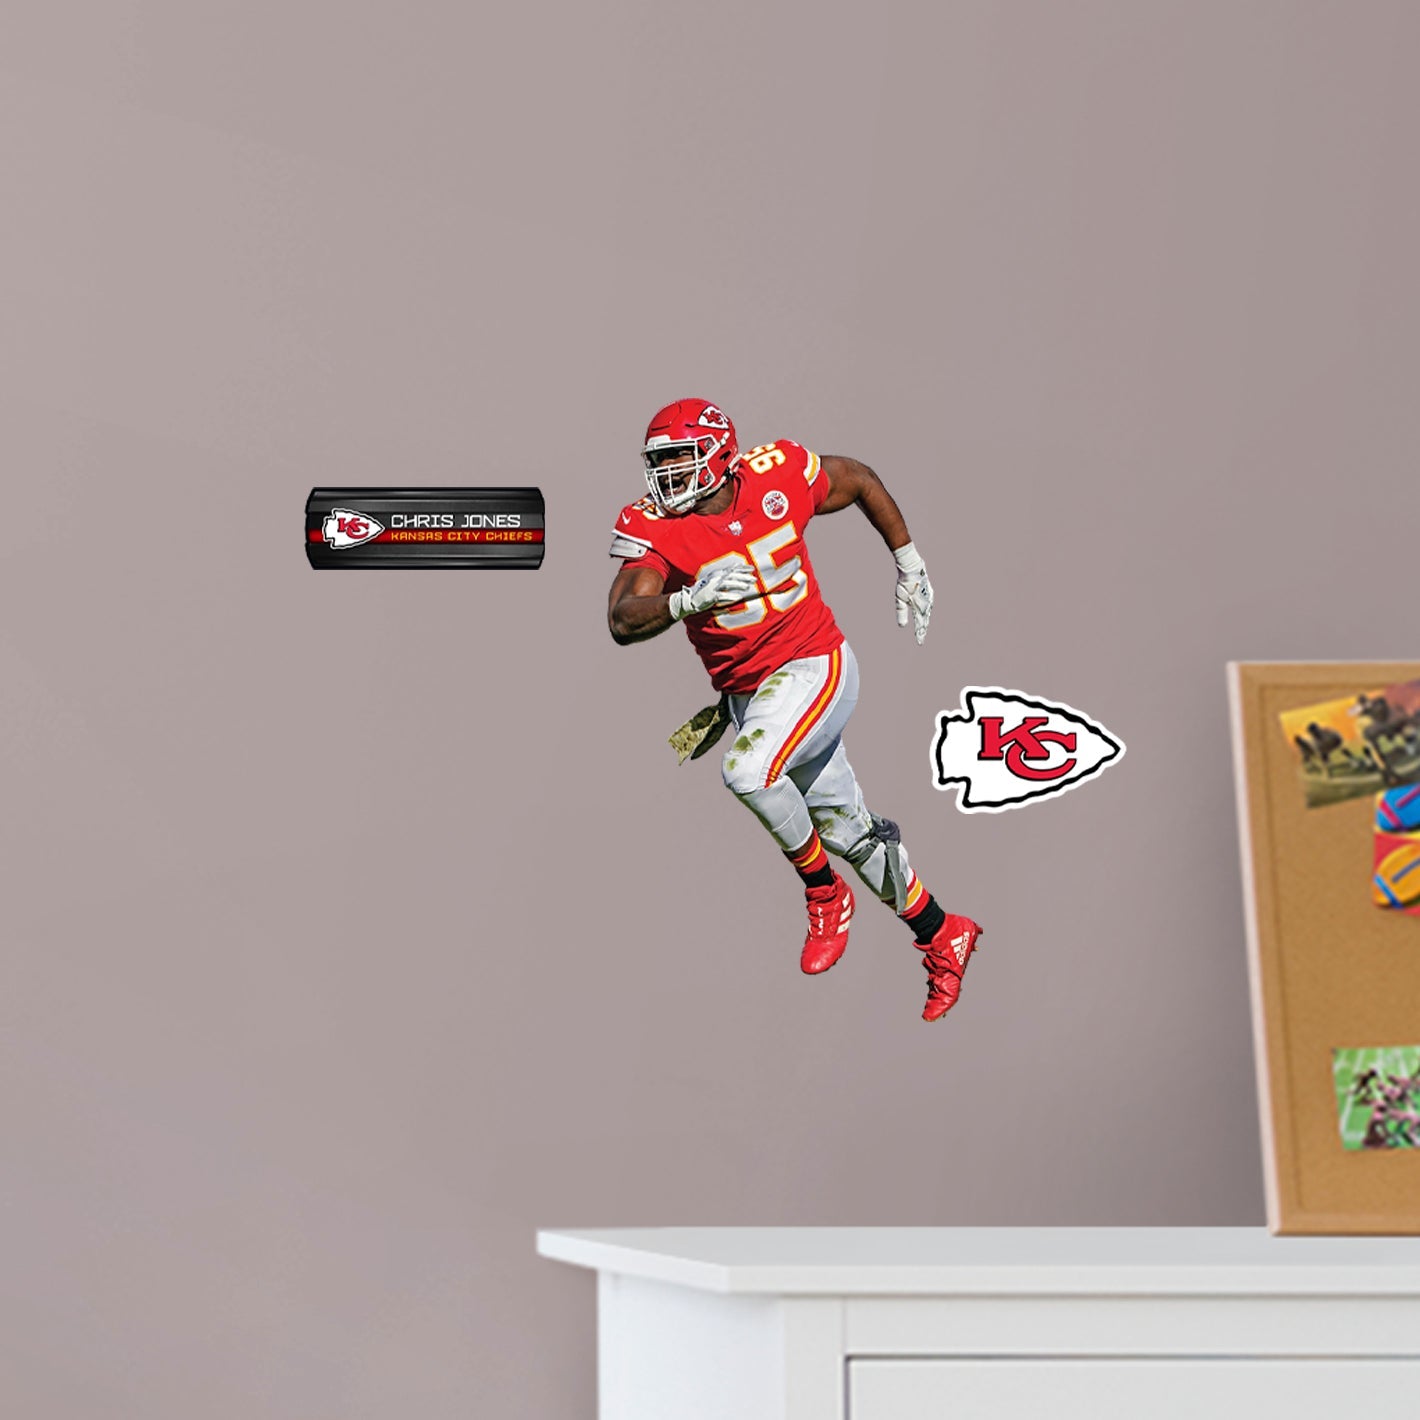 Kansas City Chiefs: Chris Jones - Officially Licensed NFL Removable Adhesive Decal